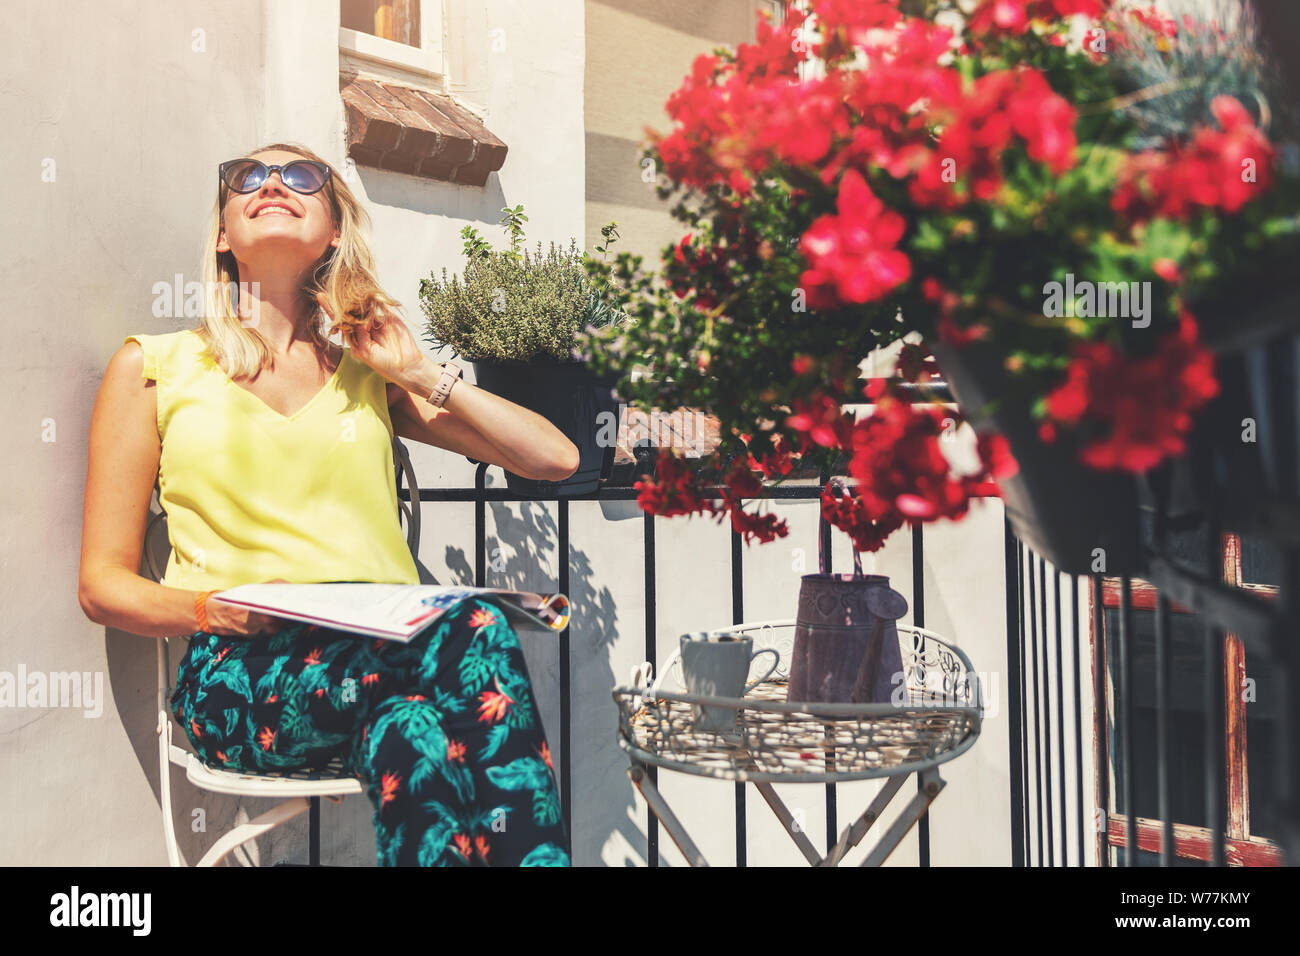 young woman enjoying the sun on romantic balcony with flower boxes Stock Photo